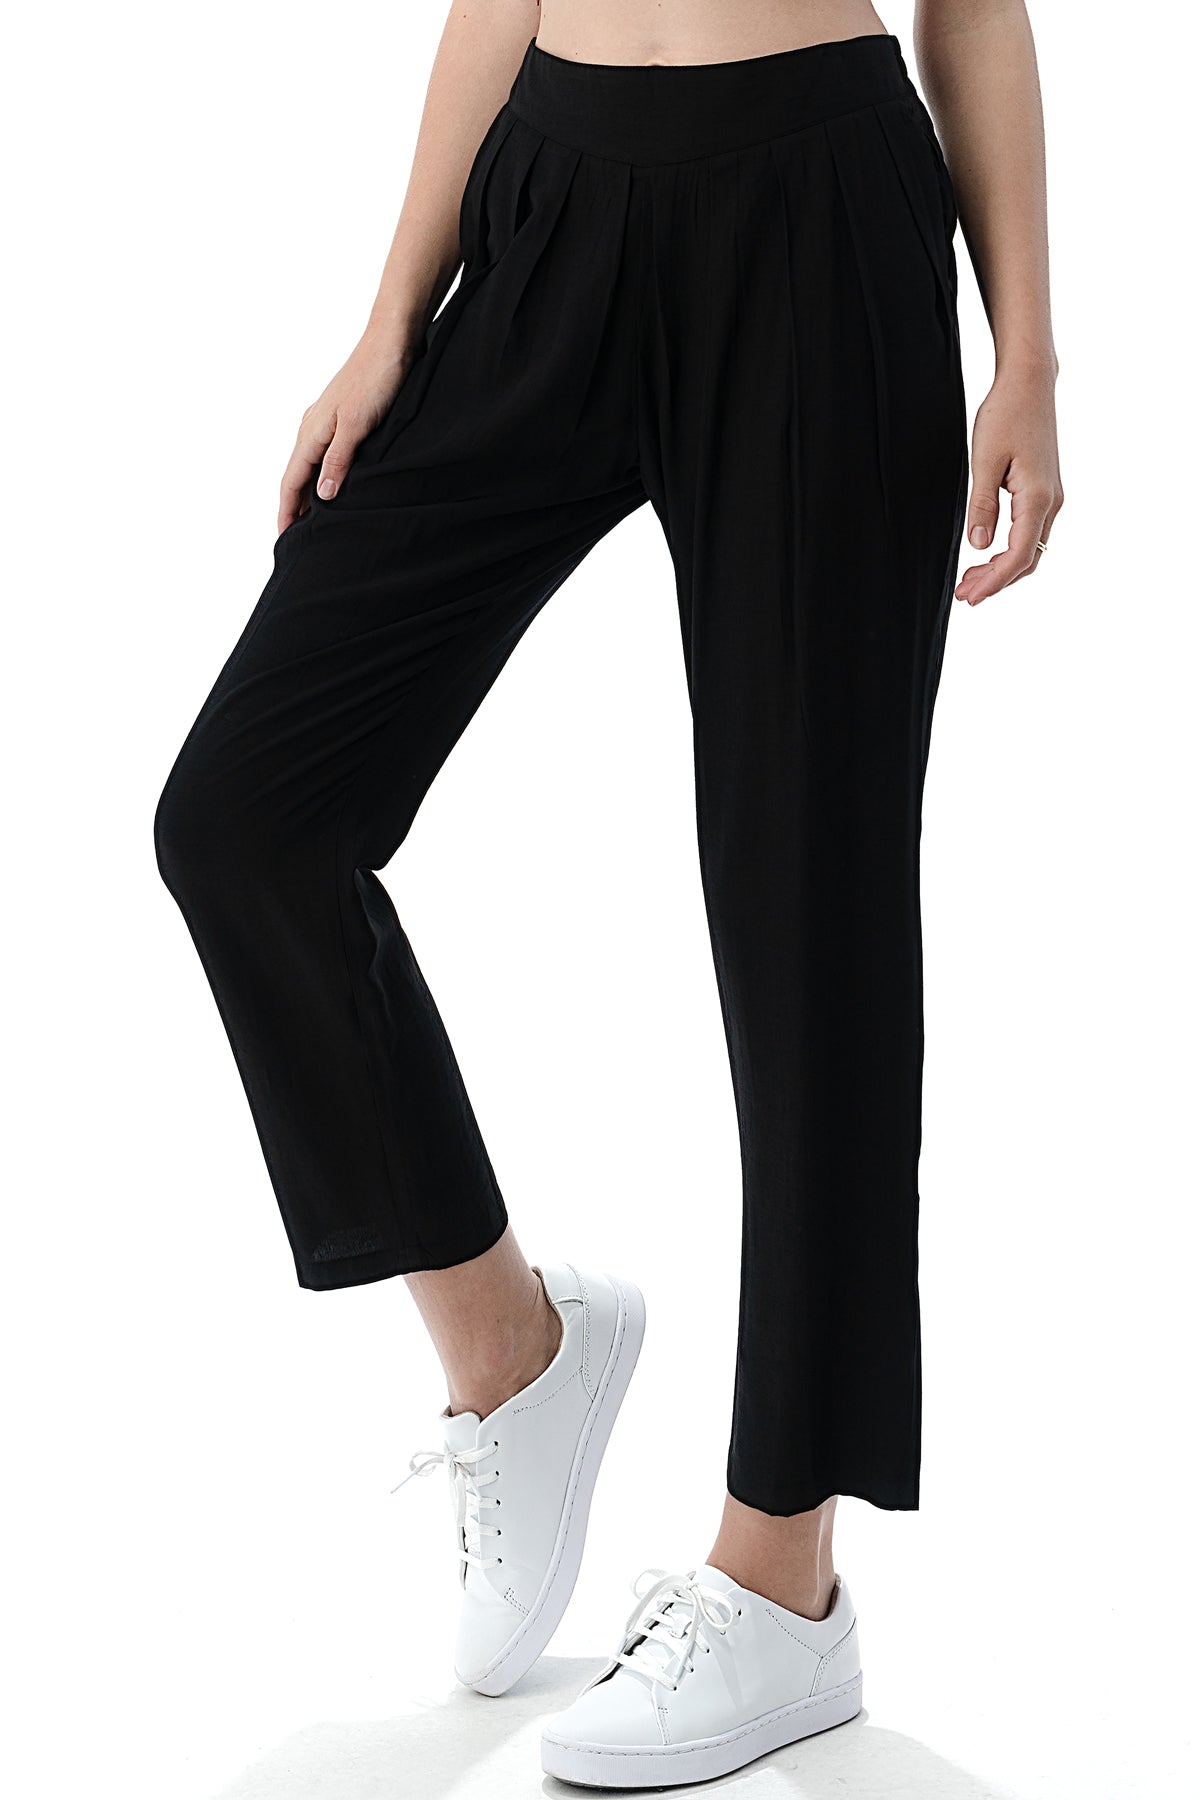 EDGY Land Girl's and Women's Pleated Slim-Sation Smocking Band CroPPEd Pants